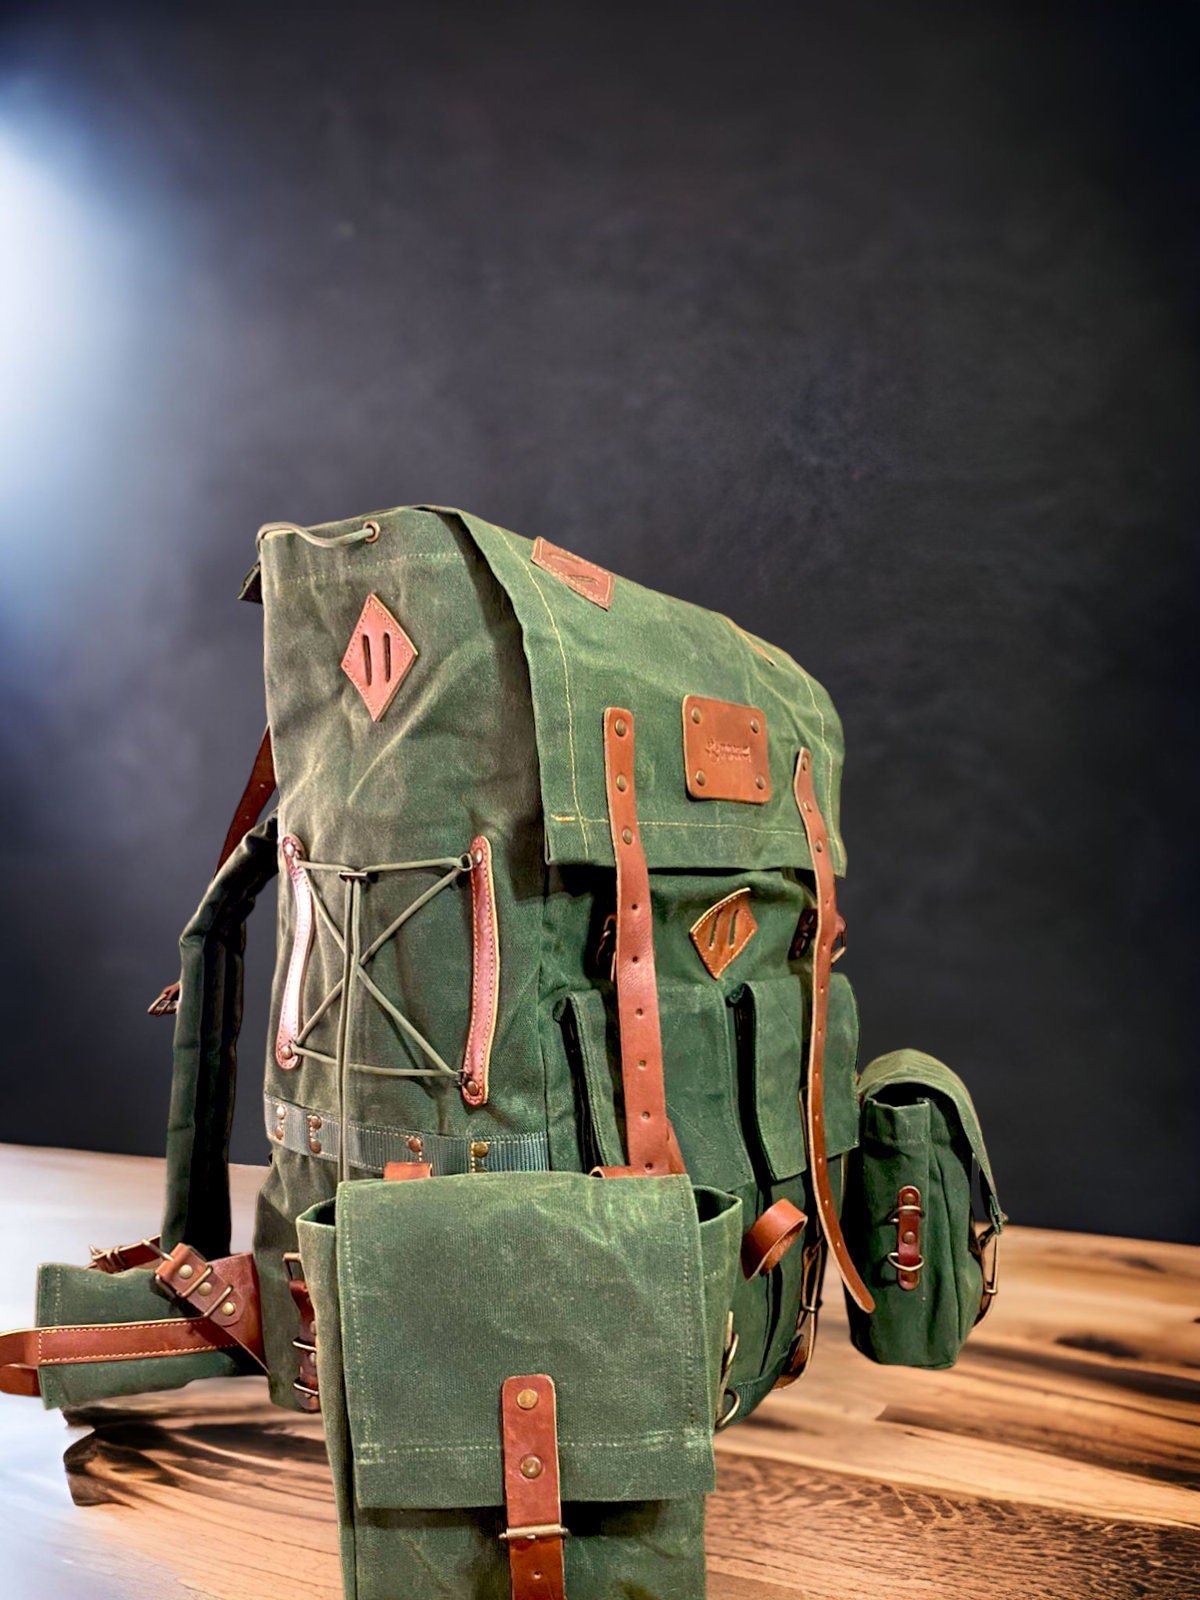 Wax Canvas - Leather Camping Backpack, Green, Brown, Black. –  99percenthandmade